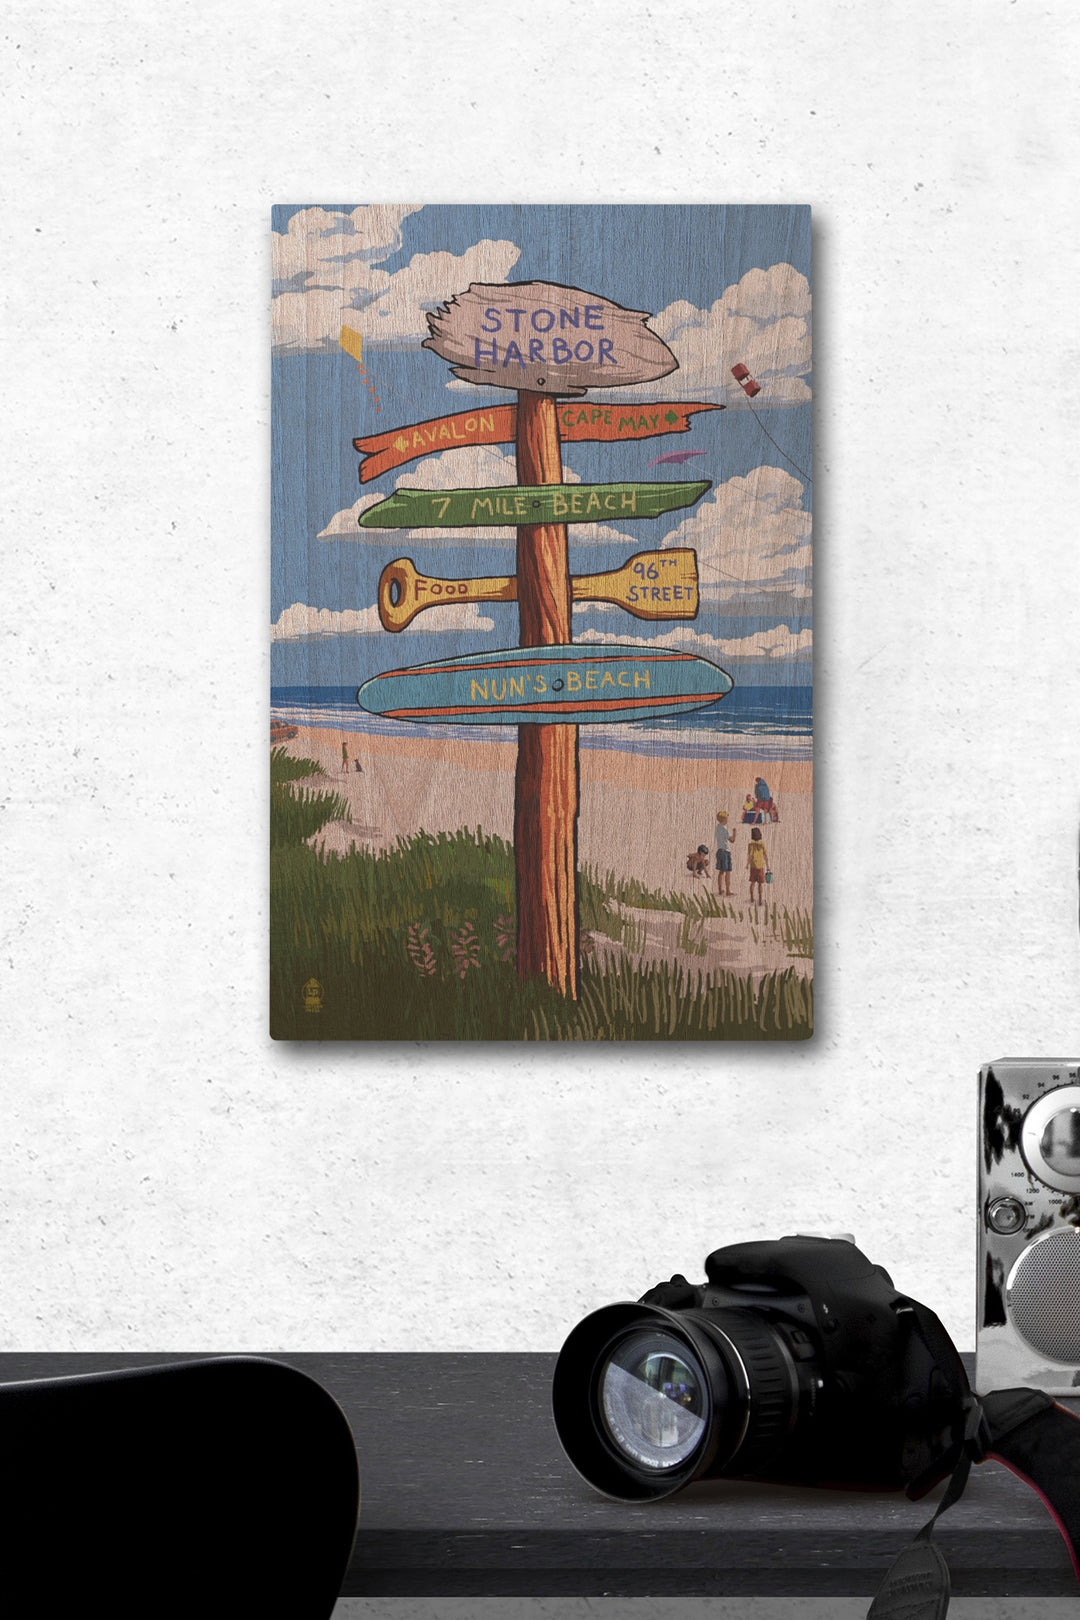 Stone Harbor, New Jersey, Sign Destinations, Lantern Press Poster, Wood Signs and Postcards